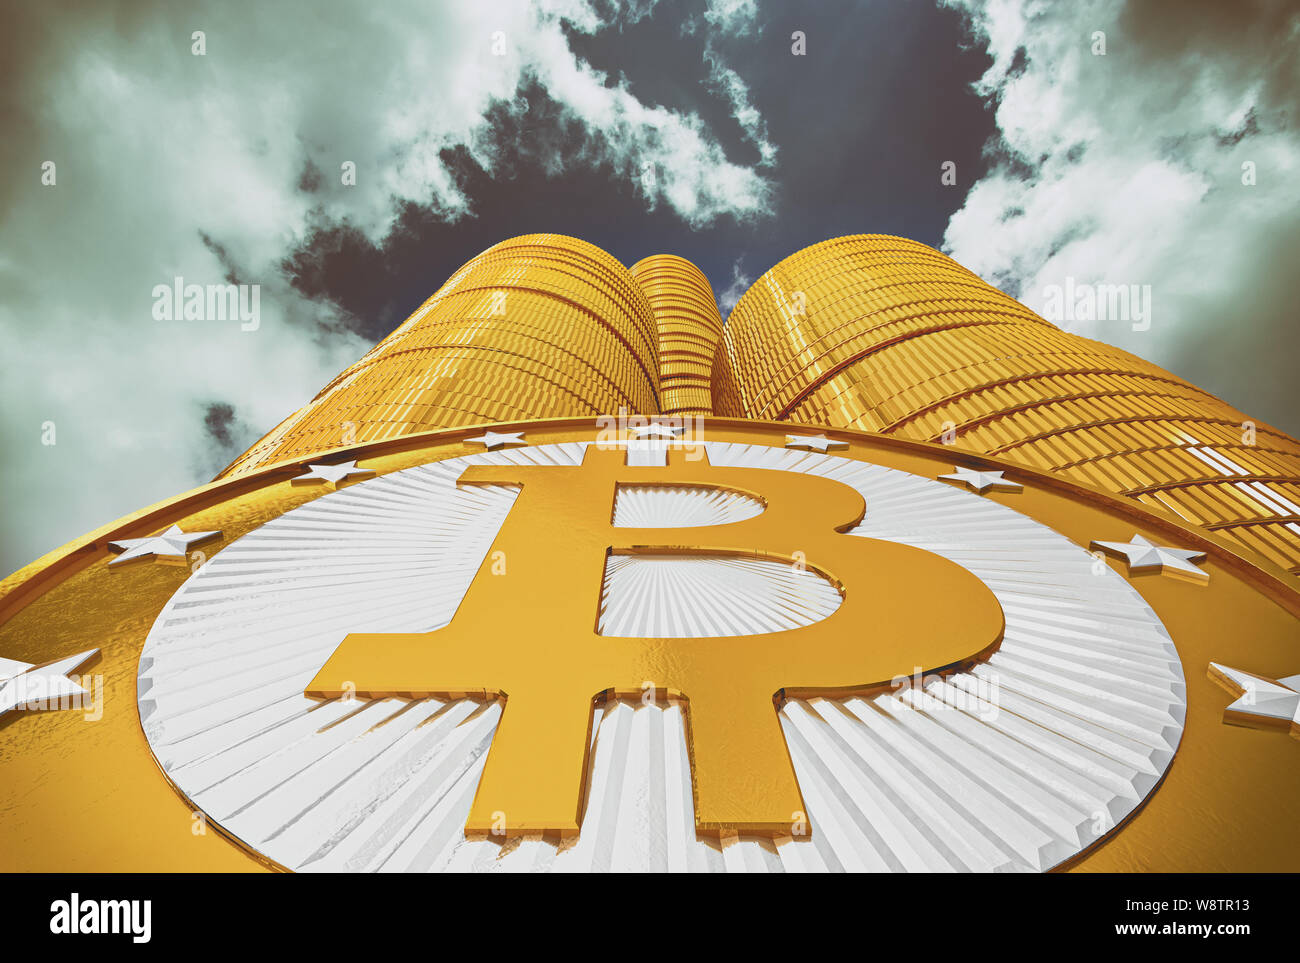 Bitcoin 'Skyscraper' - looking up a giant stack of Bitcoins - Bitcoin stacks representing Sykscrapers - 3D Rendering Stock Photo